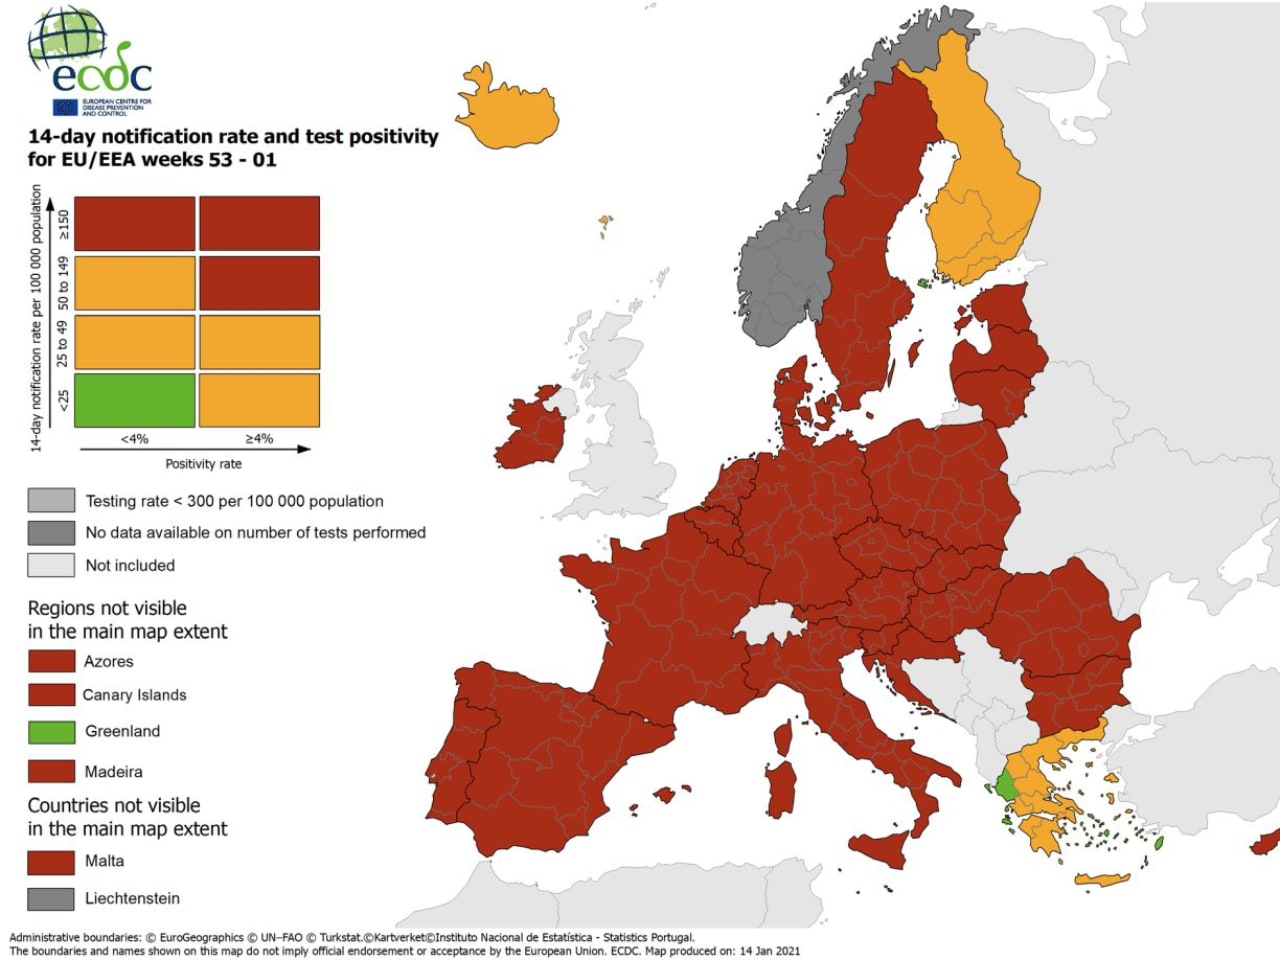 ECDC Covid-19 Map Shows Europe’s Green Areas are in Greece